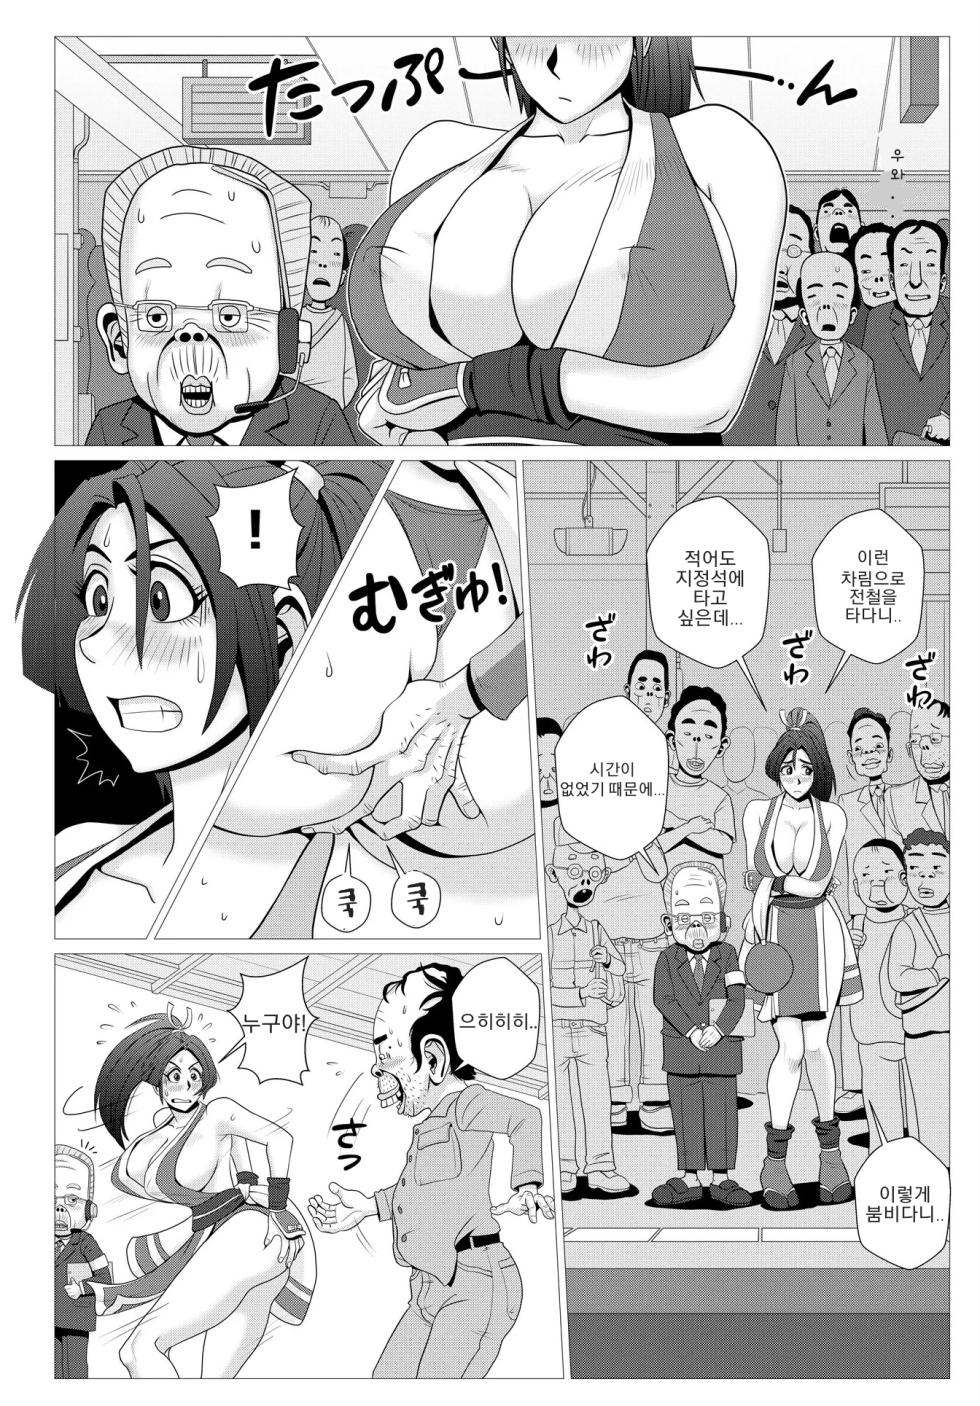 [Falcon115 (Forester)] Maidono no San (The King of Fighters) [Korean] - Page 5